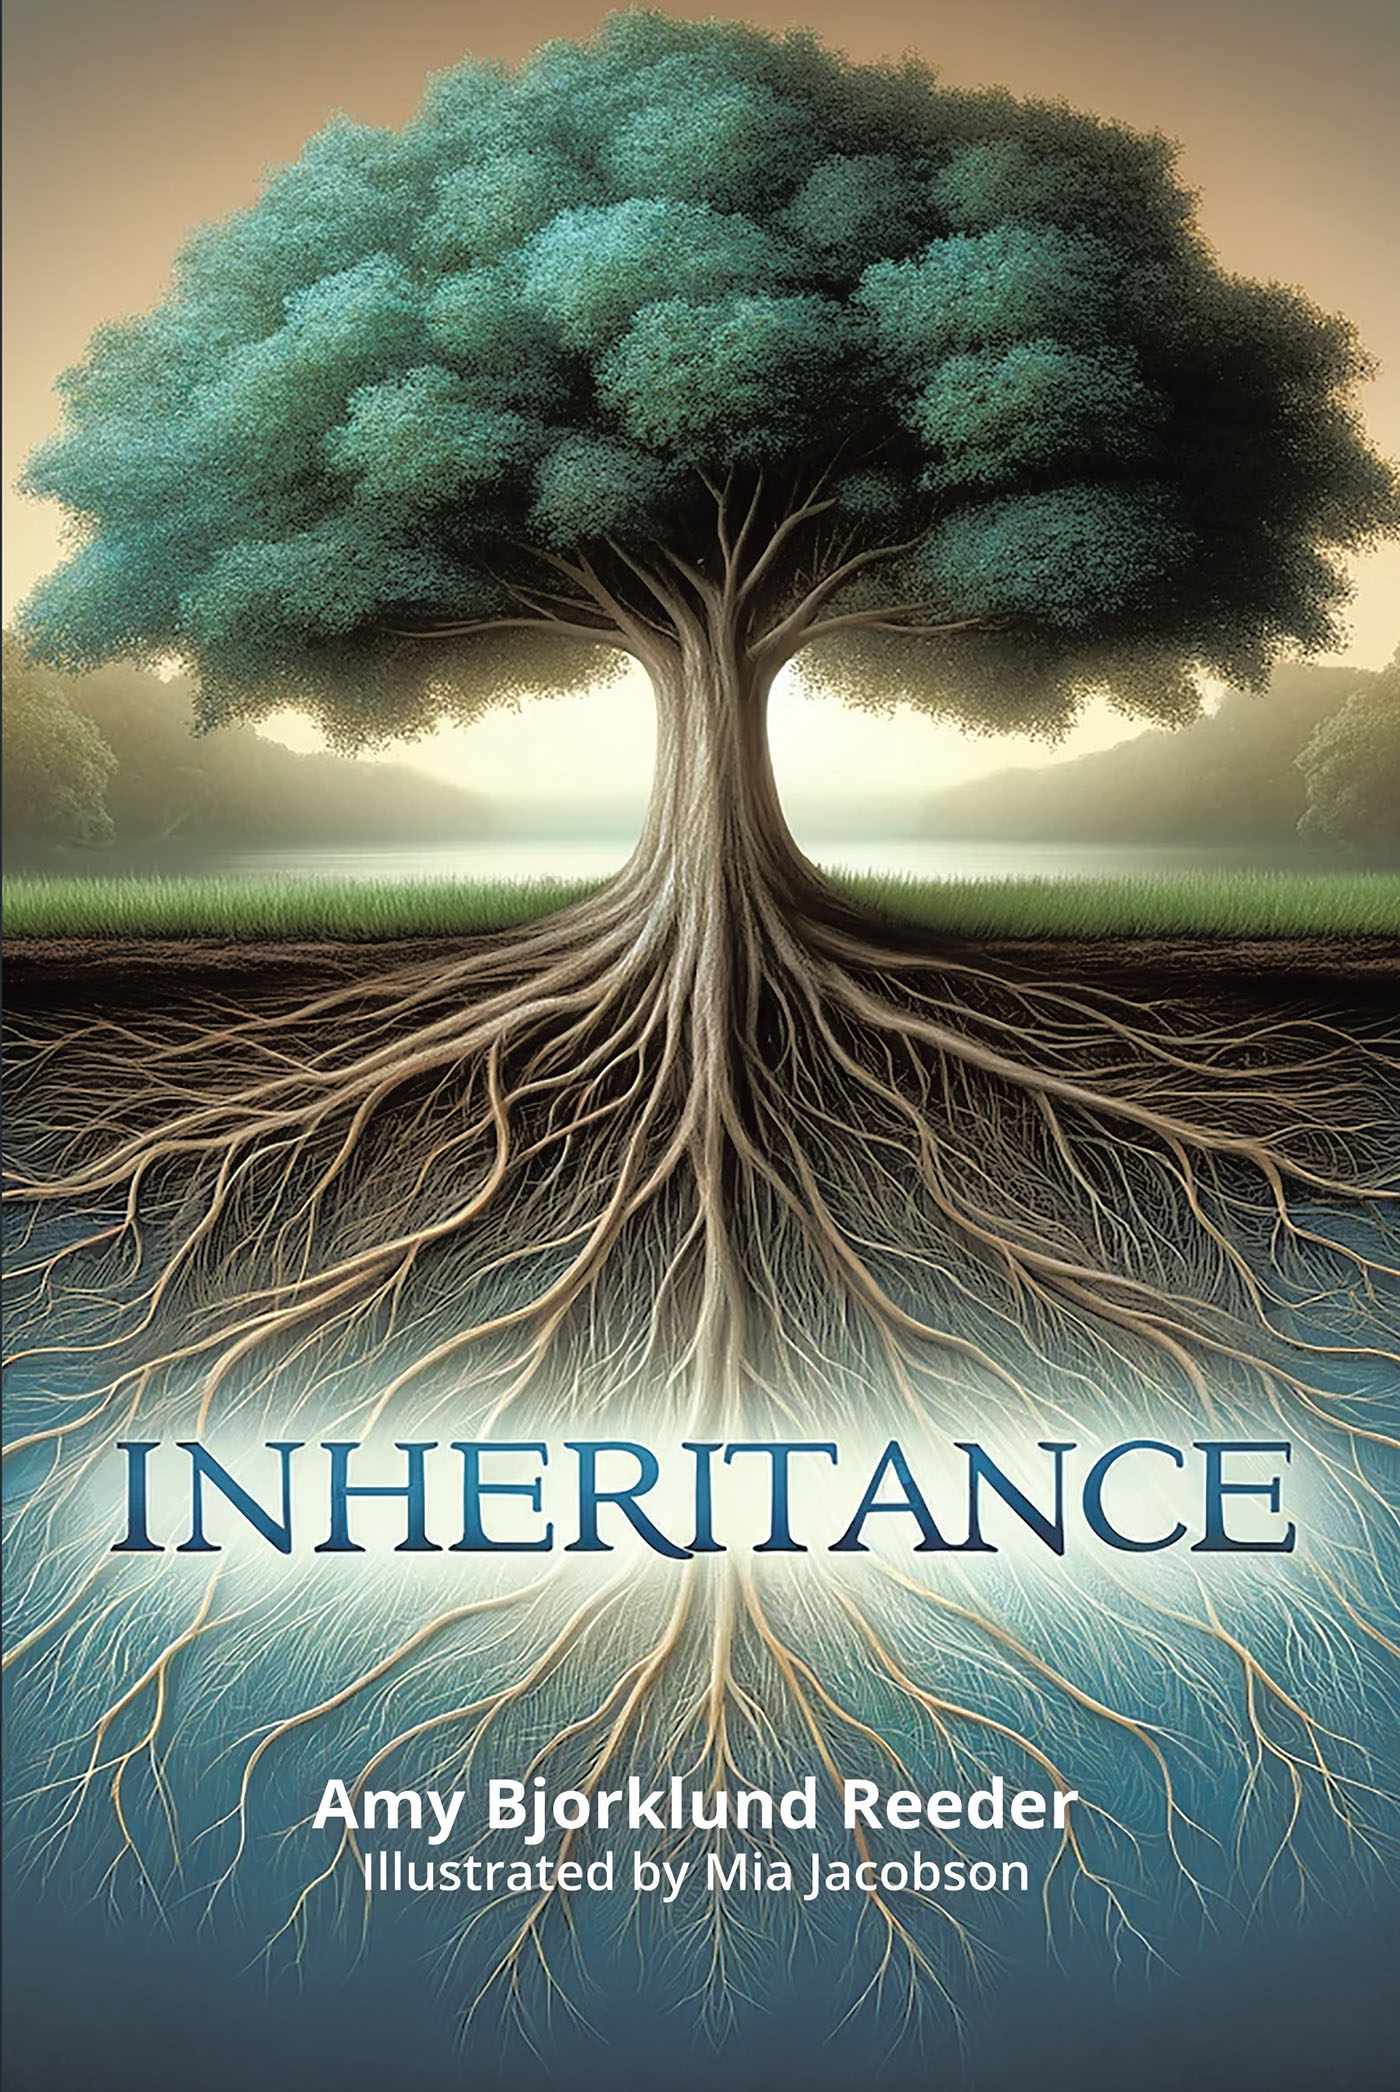 Author Amy Bjorklund Reeder and Illustrator Mia Jacobson’s New Book, "Inheritance," Follows the Lives and Struggles of the Ryan Siblings After Losing Their Parents